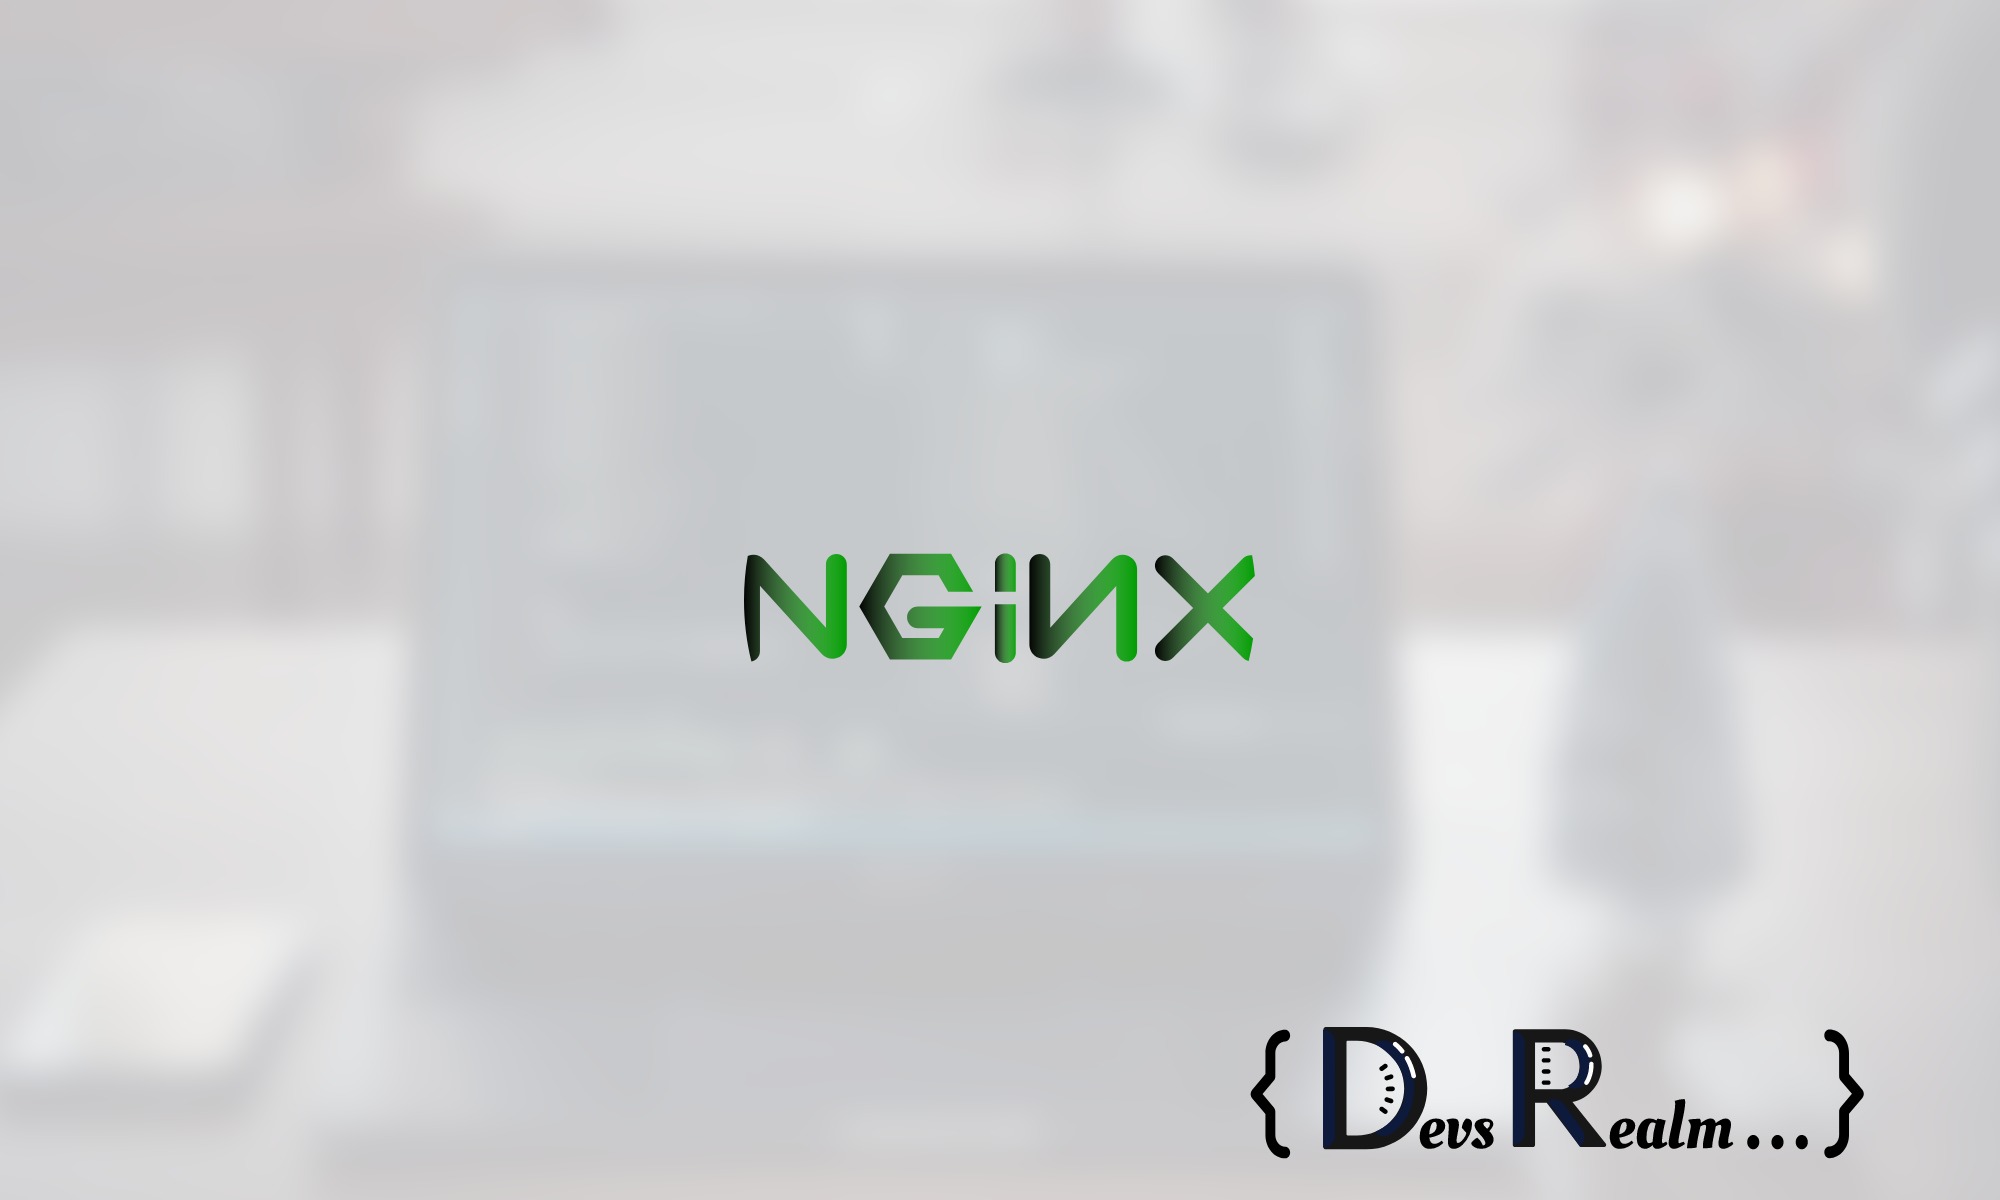 Installing Nginx Server as Reverse-Proxy for Apache [Multiple Websites]